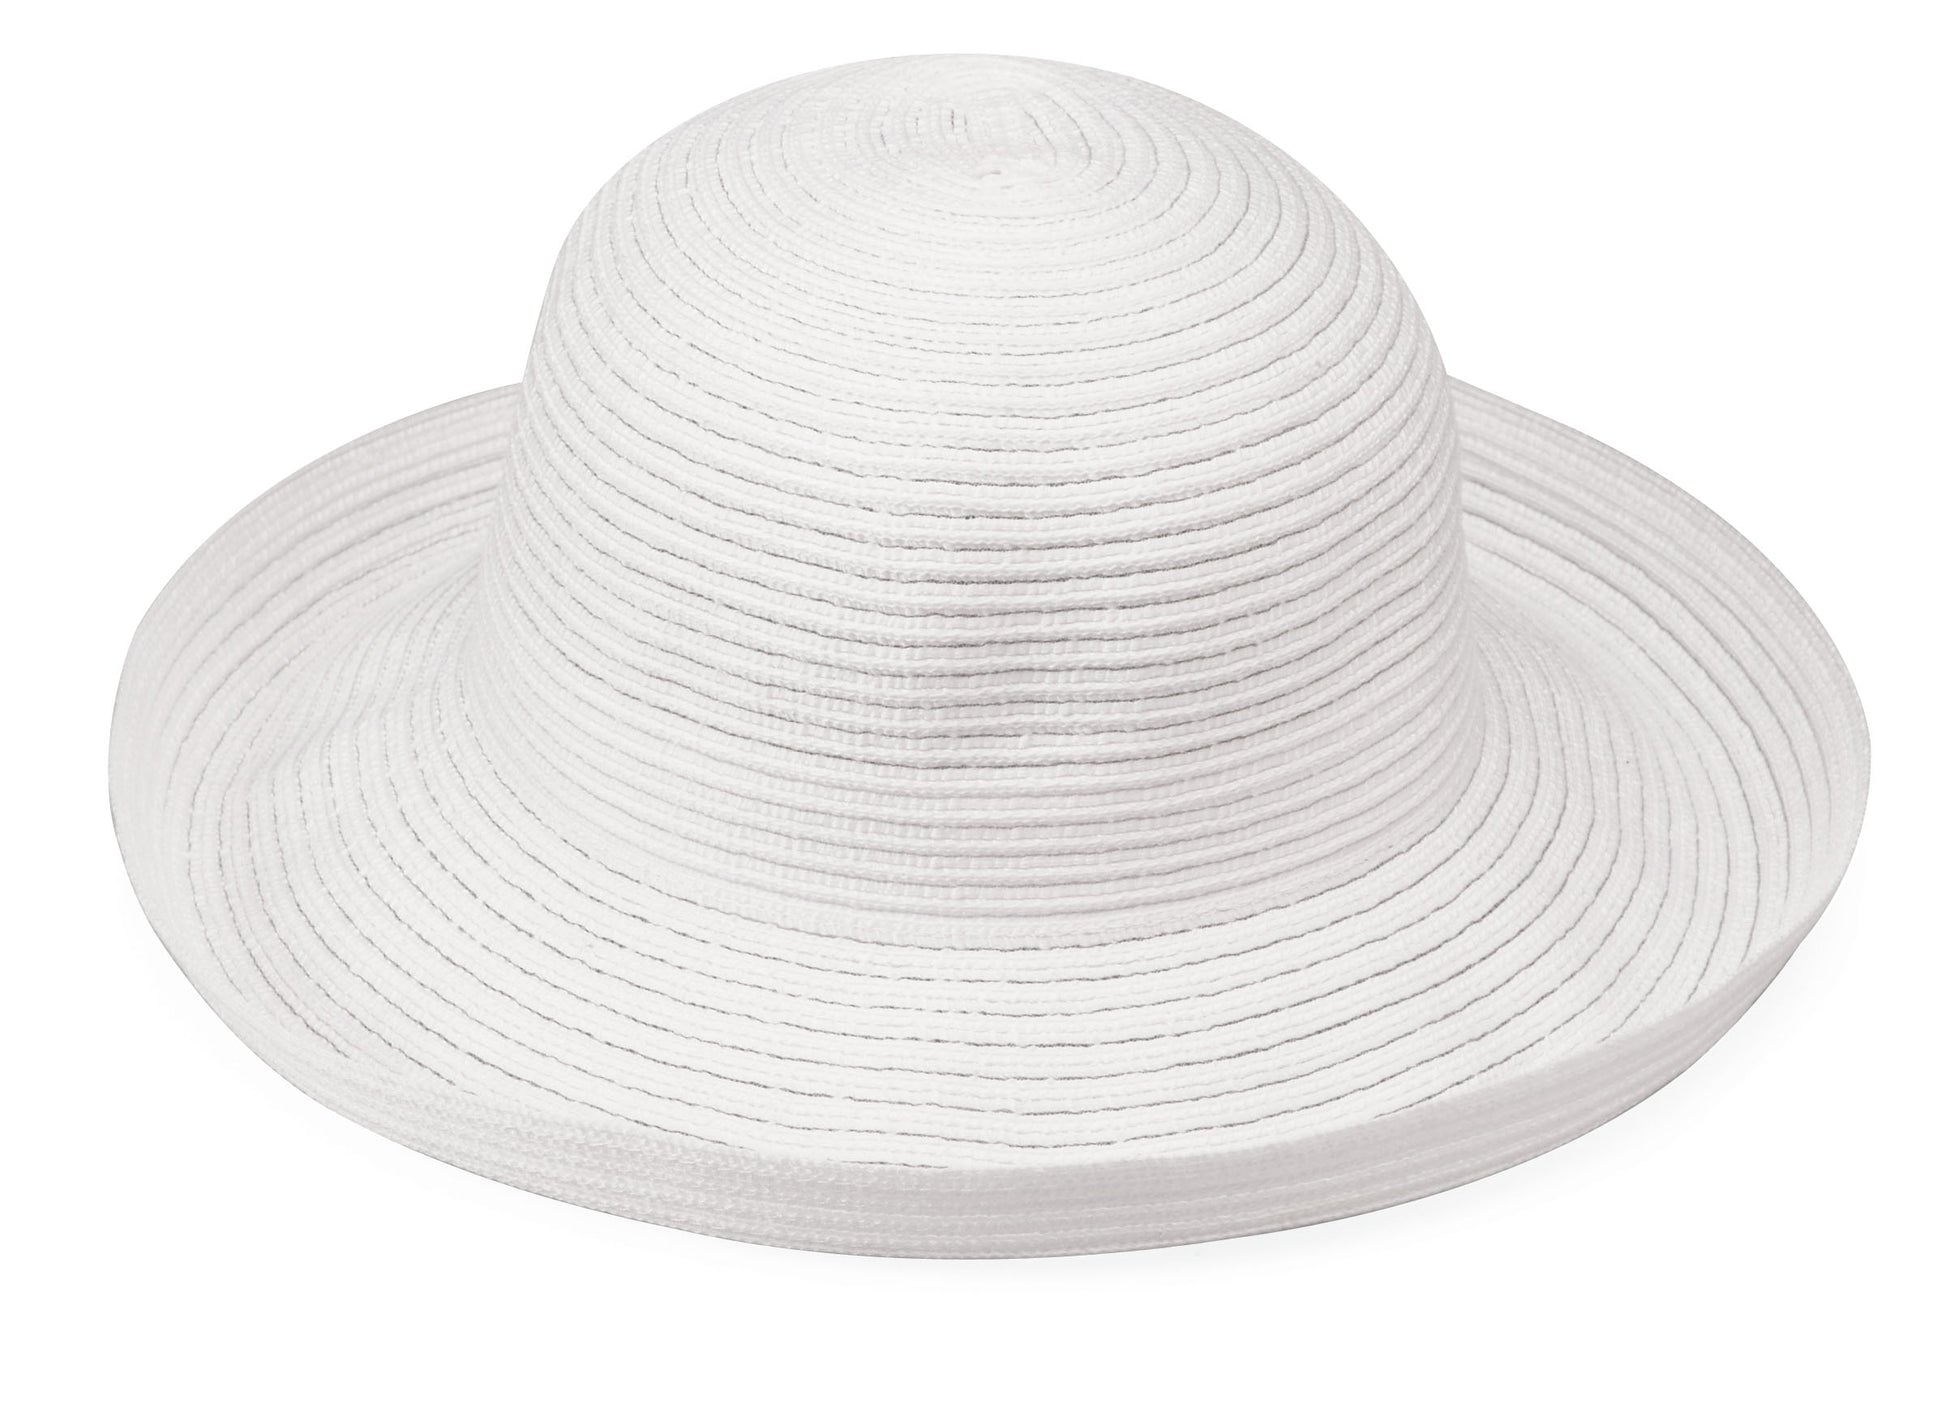 This packable white beach hat not only offers UPF 50+ sun protection but is also recommended by the Skin Cancer Foundation. Its wide brim ensures stylish sun coverage, making it a travel-friendly and fashionable addition to your personal fashion collection.